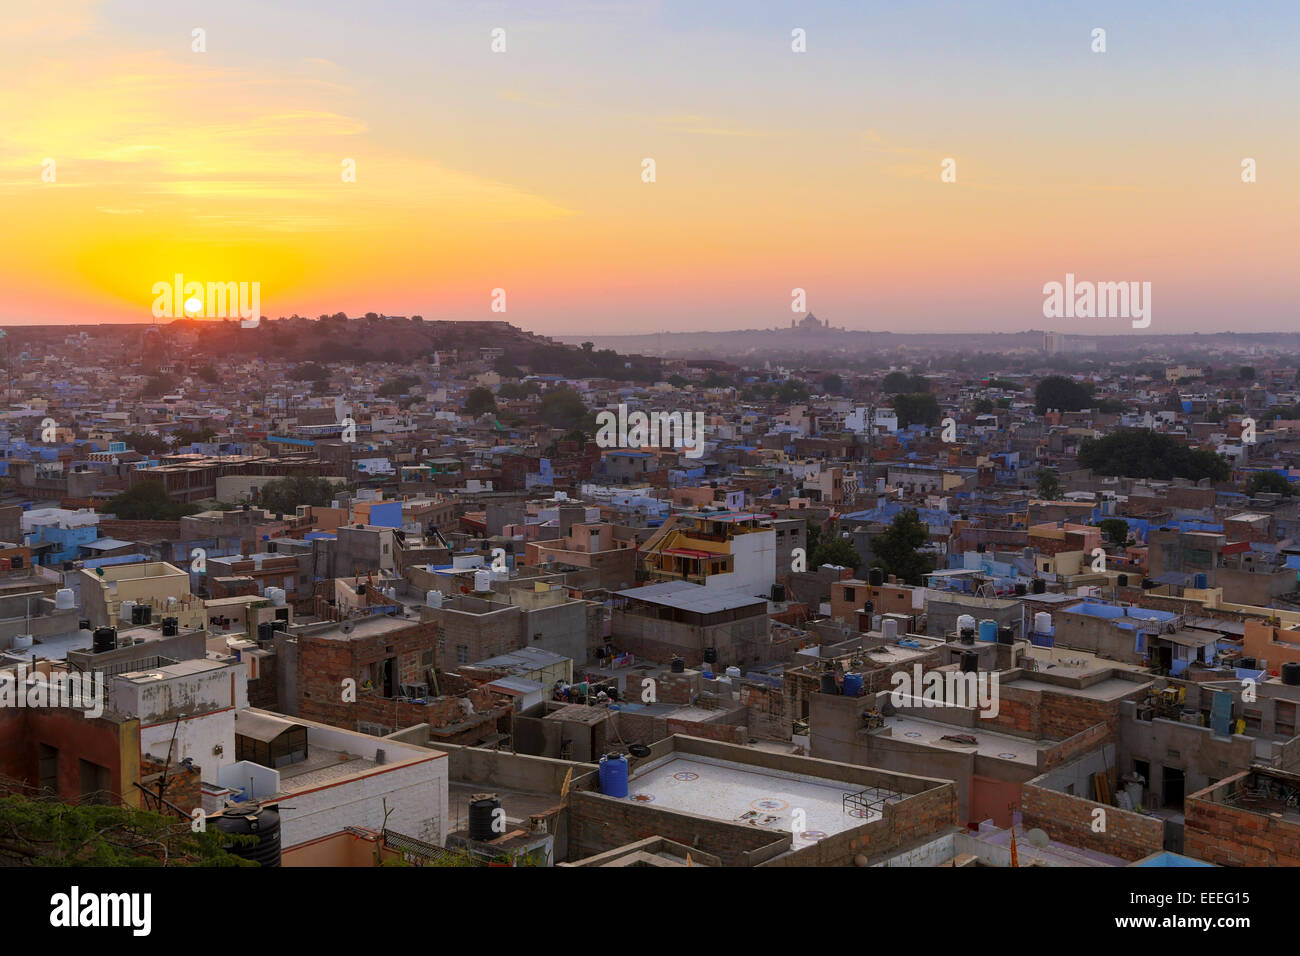 India, Rajasthan, Jodhpur, sunrise over the old city with Umaid Bhawan Palace in the distance Stock Photo